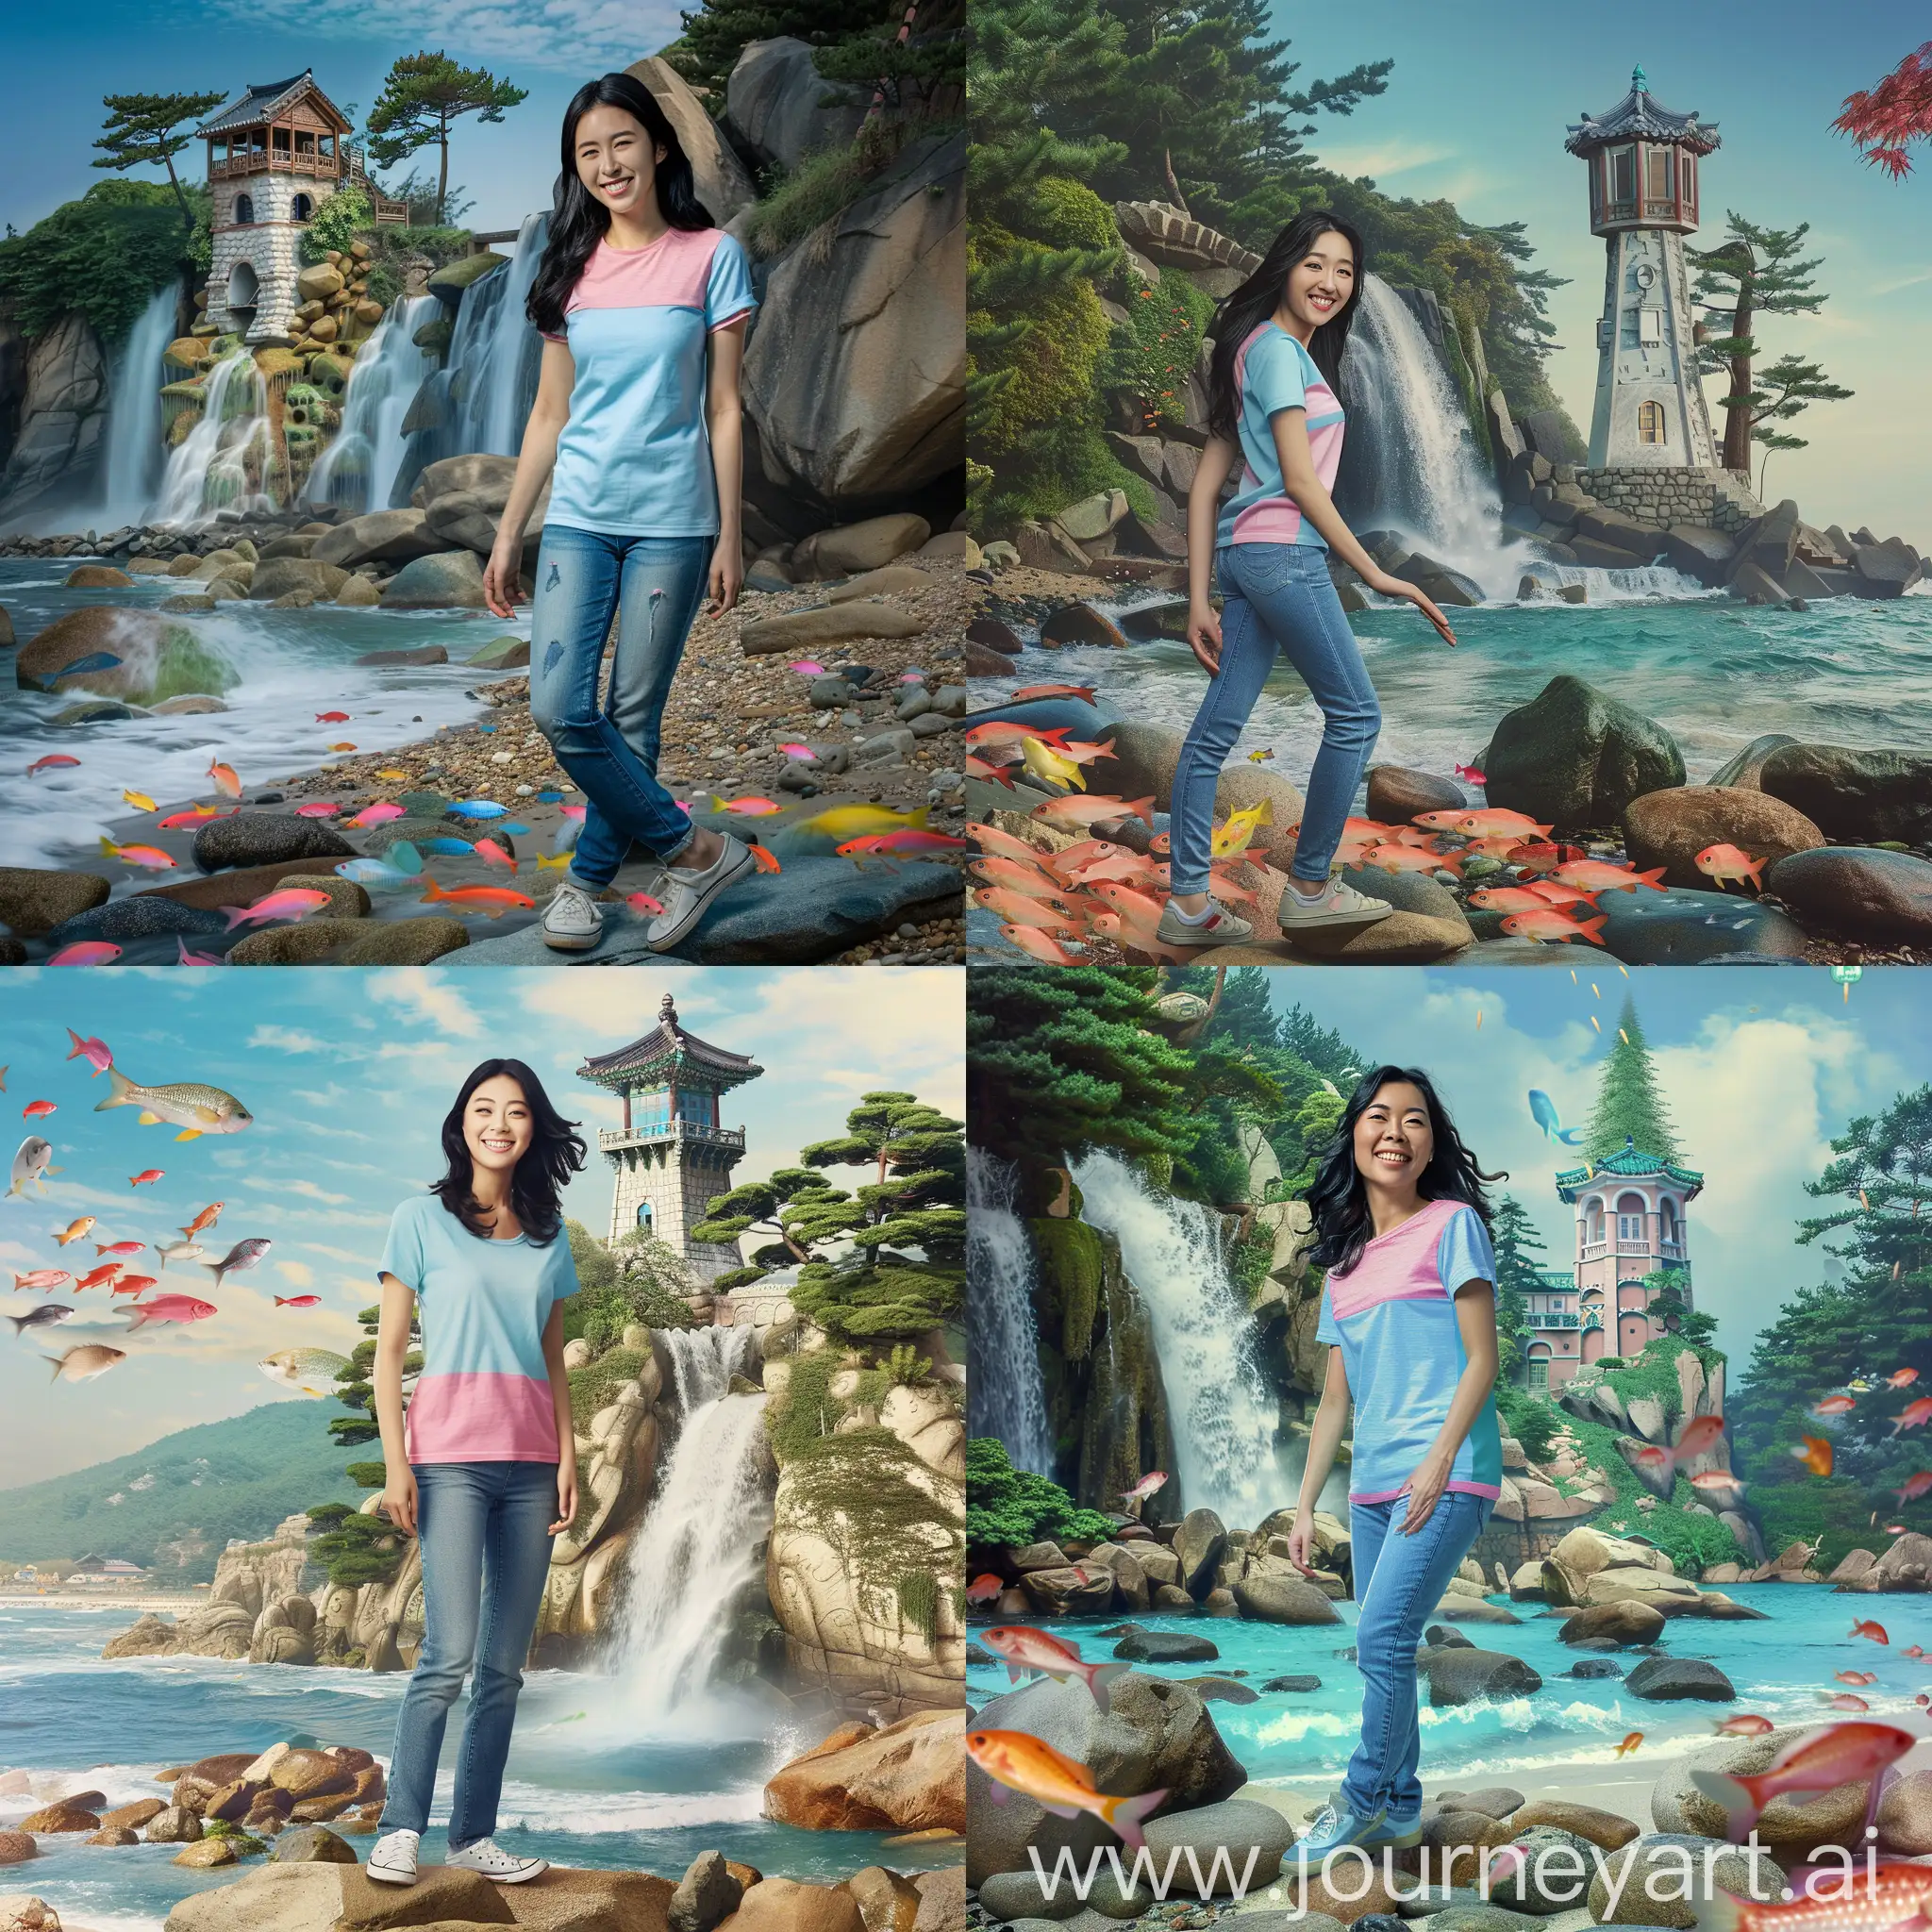 Subject: A beautiful asian Korean woman, exuding joy and warmth. Setting: She stands on rocks along a vibrant beach, with a stunning waterfall and a unique pine tree tower house in the background. Background: The beach setting features colorful fish, enhancing the natural beauty. Style/Coloring: The image is presented in high-definition, emphasizing realism. The woman wears a light blue and pink t-shirt, paired with jeans and shoes. Action: Capturing her in a smiling pose adds a positive and lively element to the image. Items: The prominent features include the waterfall, beach rocks, and a distinctive pine tree tower house. Costume/Appearance: The woman's attire consists of a light blue and pink t-shirt, jeans, and shoes, complementing her black hair and bright face. Accessories: No specific accessories mentioned in the prompt, focusing on the natural and casual elements. HD: The image is high-definition, ensuring clarity and visual appeal. Original Photo: Emphasizes authenticity and uniqueness with an original shot. Full Body: The woman is portrayed in a full-body view, providing a comprehensive visual experience. Realistic.